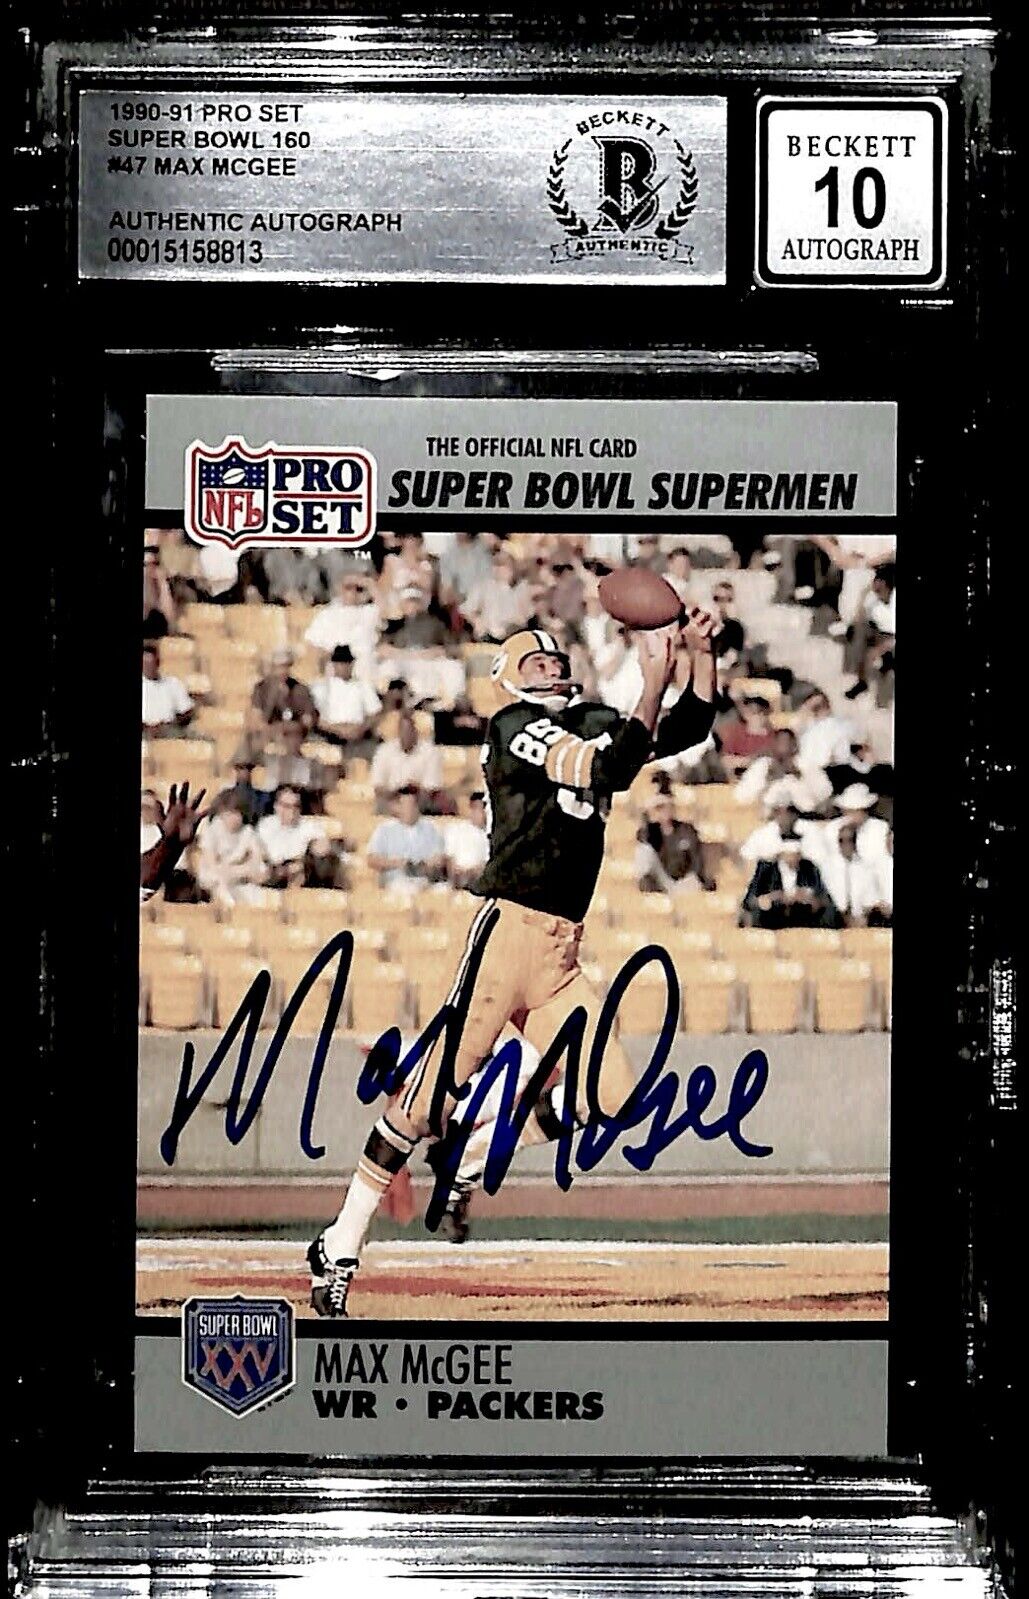 1990-91 Pro Set Super Bowl 160 #47 Max McGee PACKERS Signed Card BECKETT Auto 10